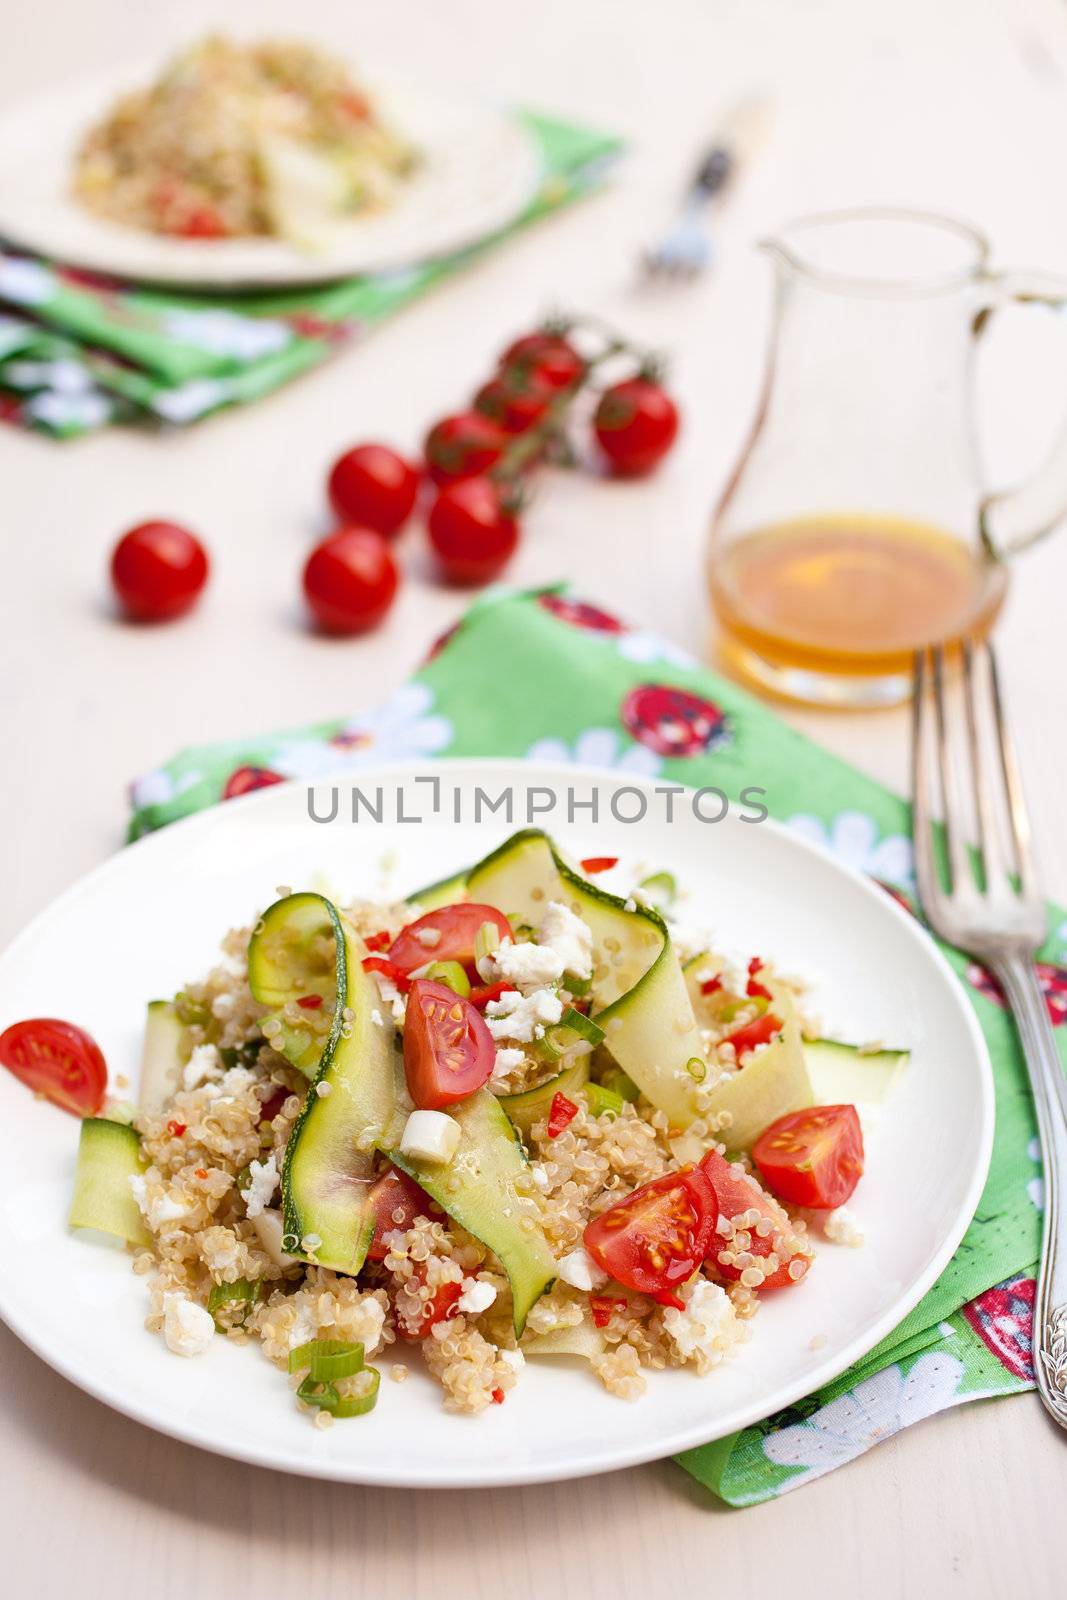 Fresh quinoa salad with tomatoes by Fotosmurf